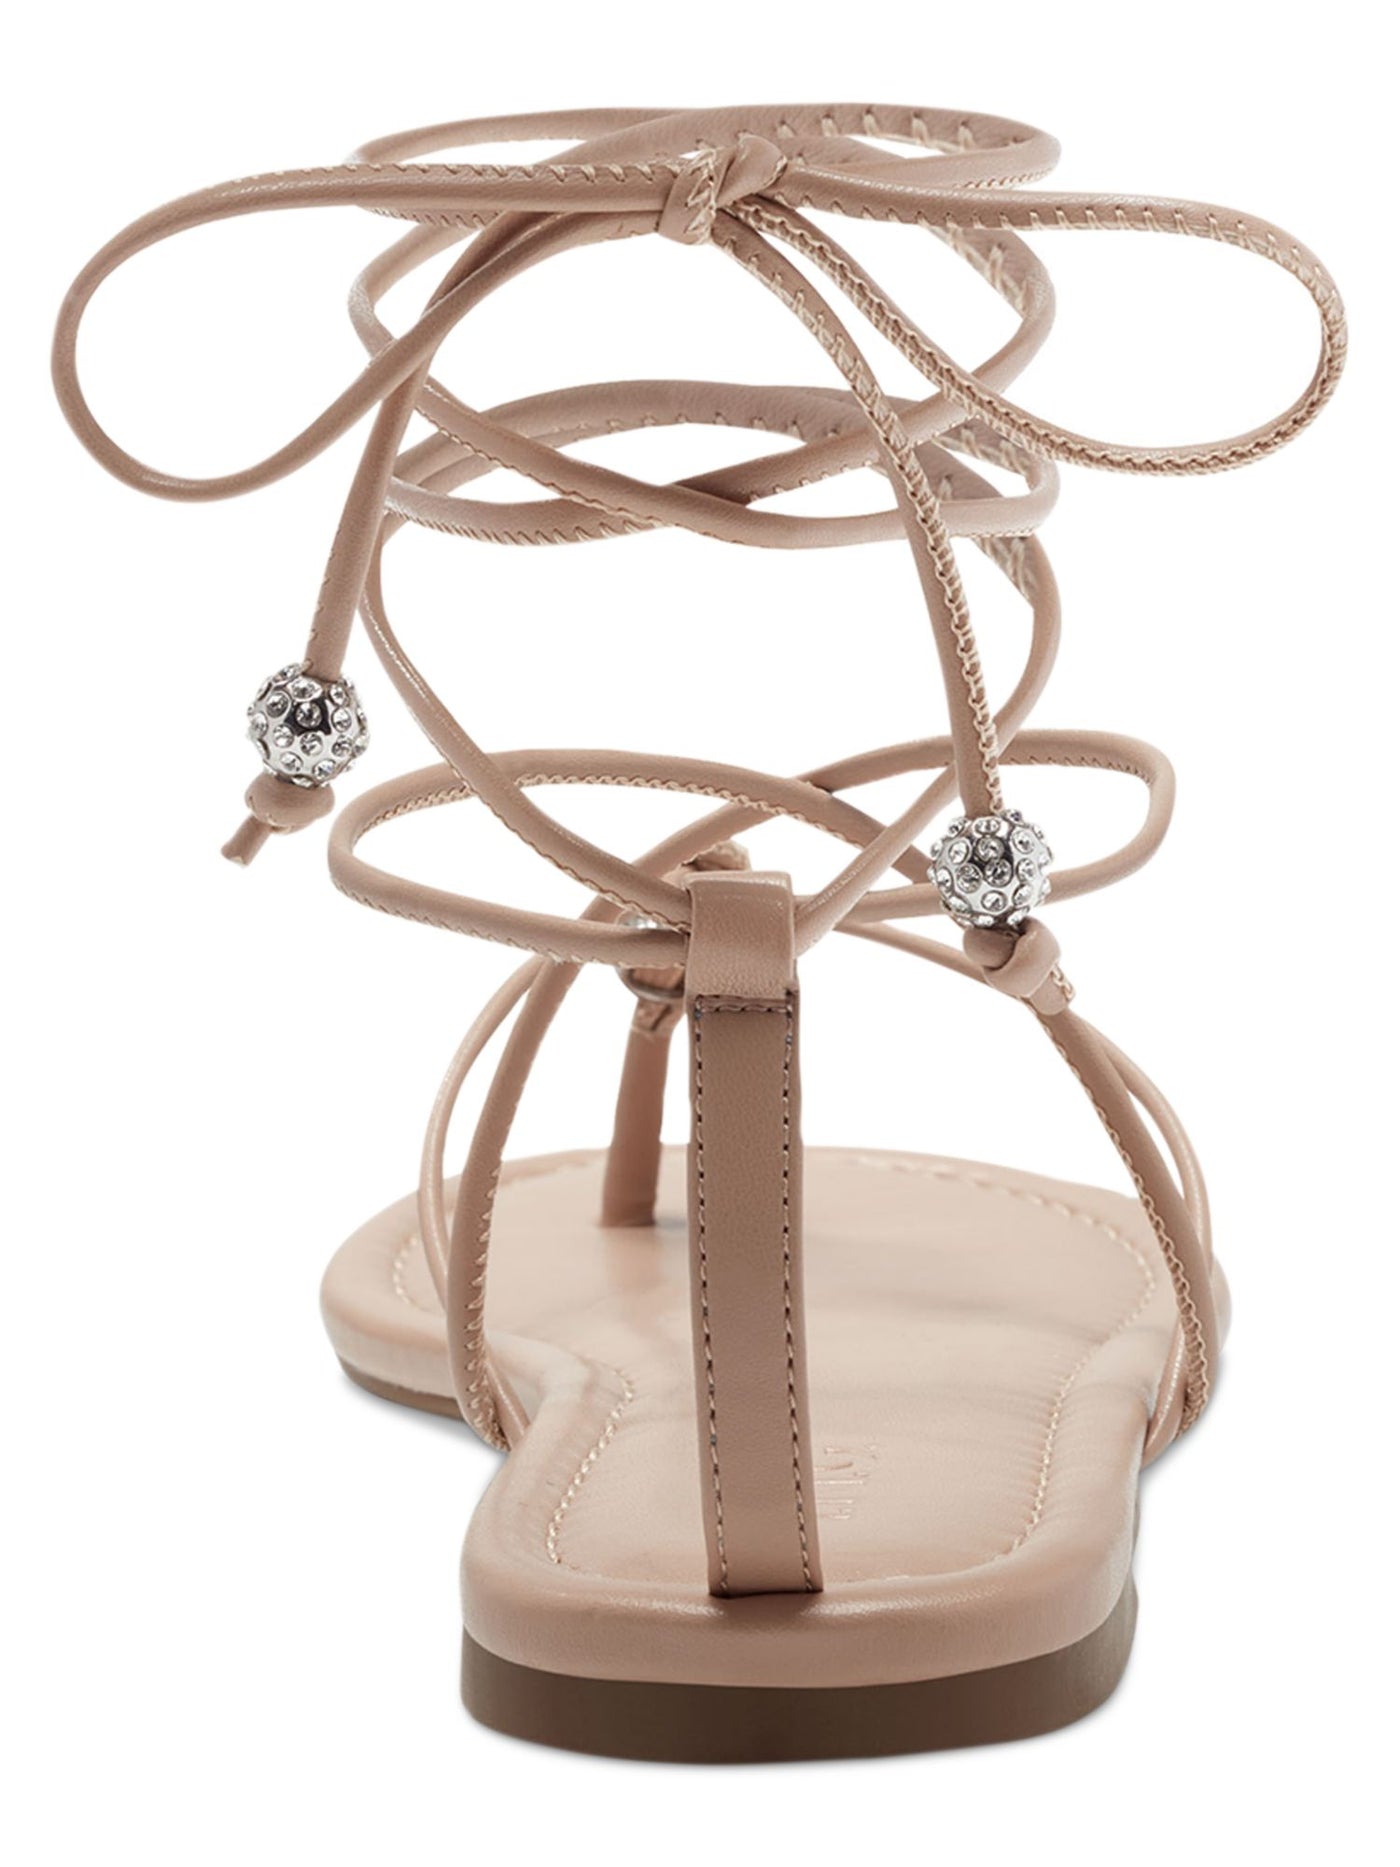 INC Womens Beige Strappy Embellished Amille Round Toe Lace-Up Thong Sandals Shoes 7.5 M